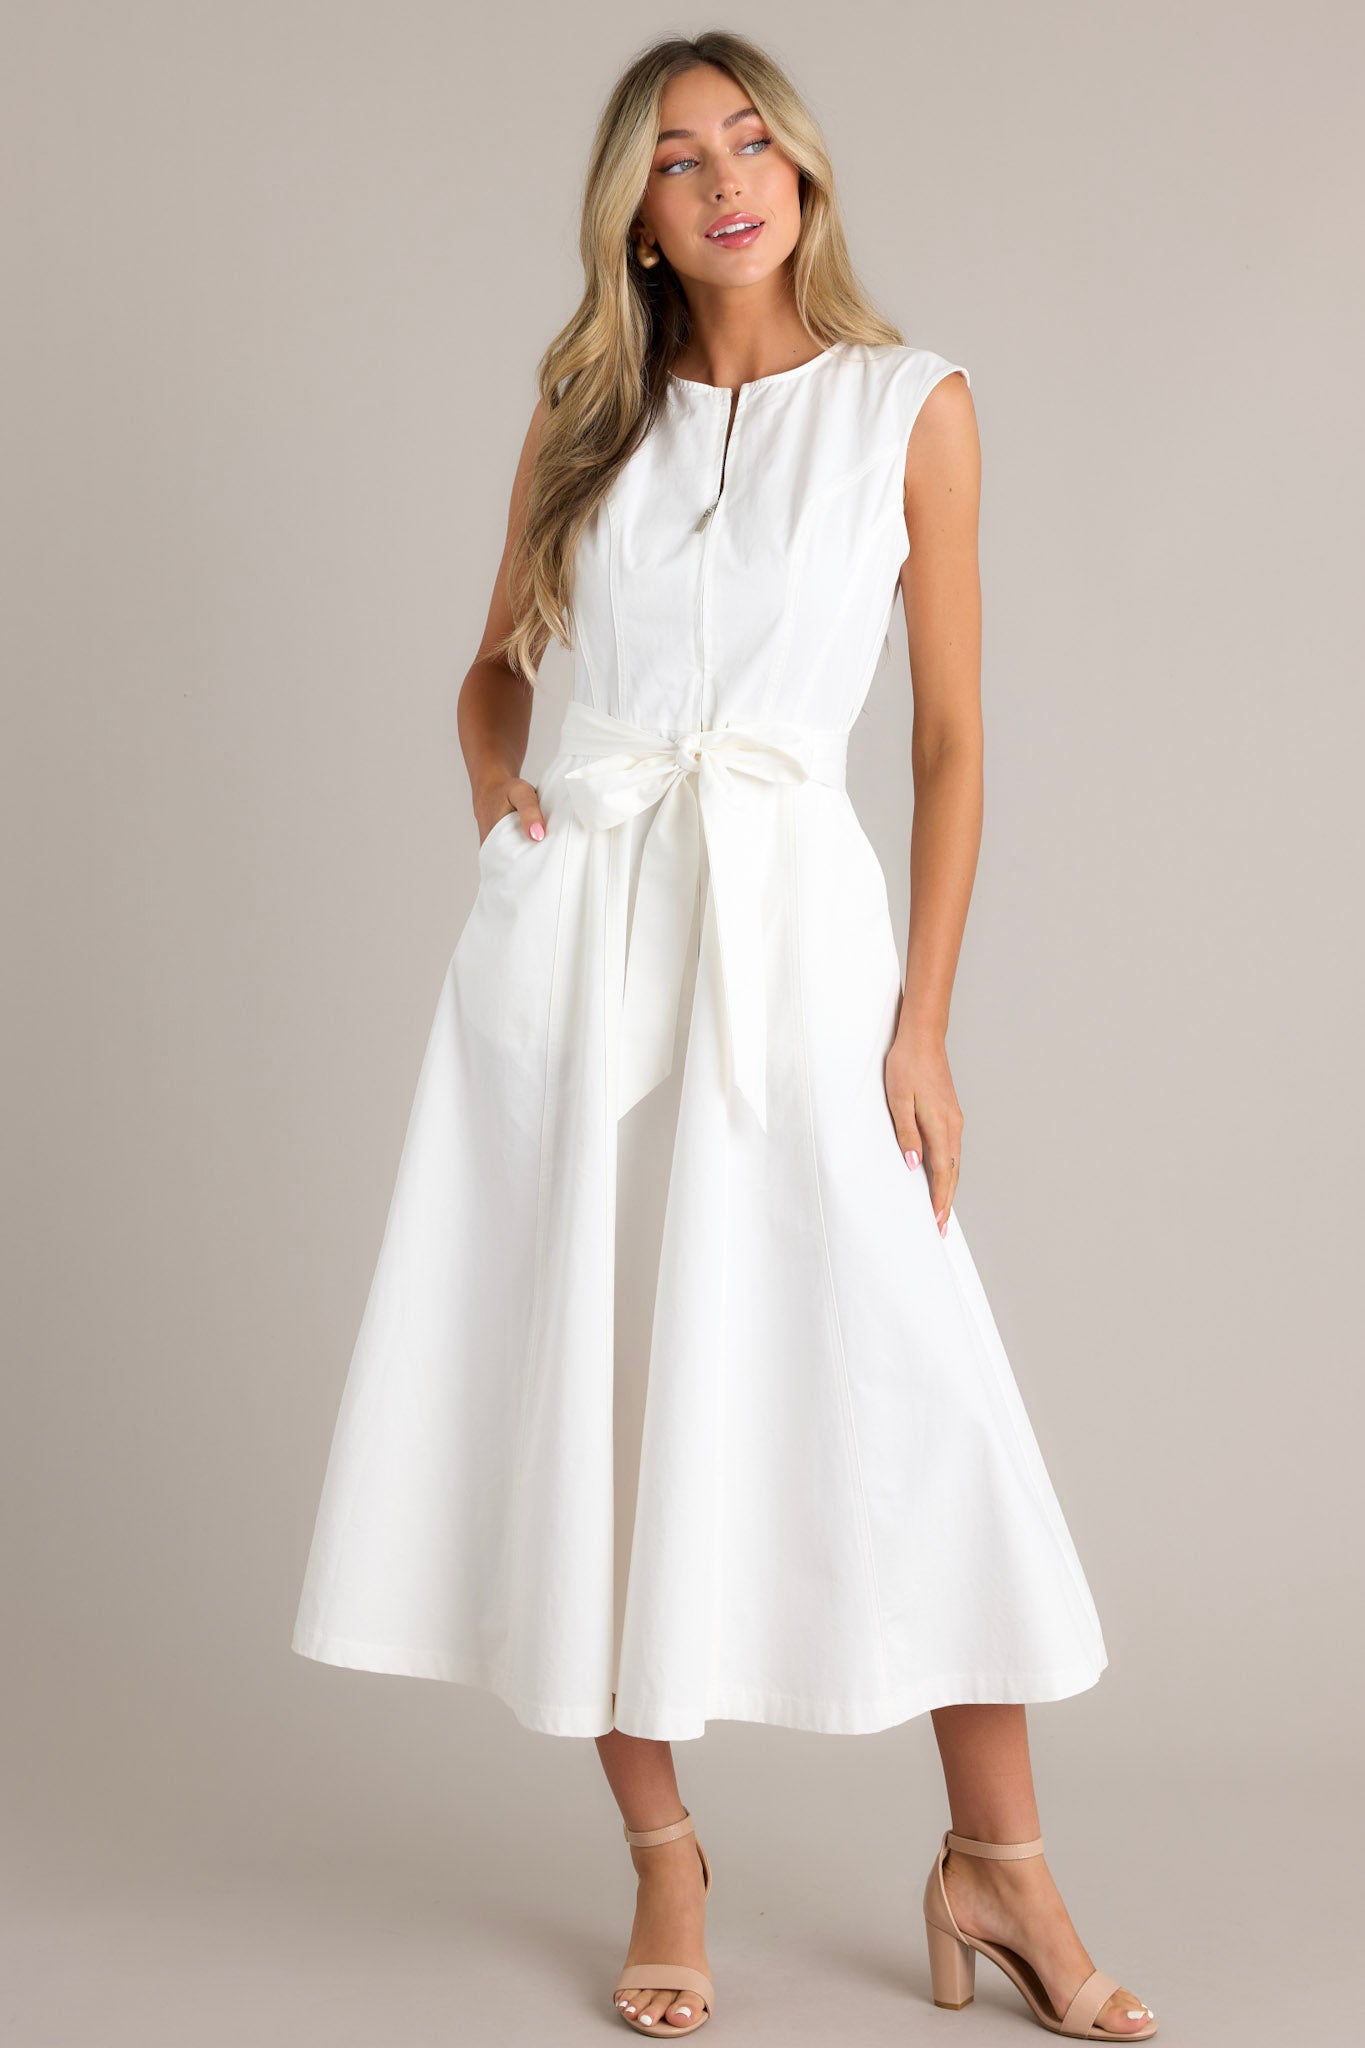 A white sleeveless midi dress with a front zipper, a fitted bodice, and a wide waist tie that forms a bow. The dress features a flared skirt and side pockets